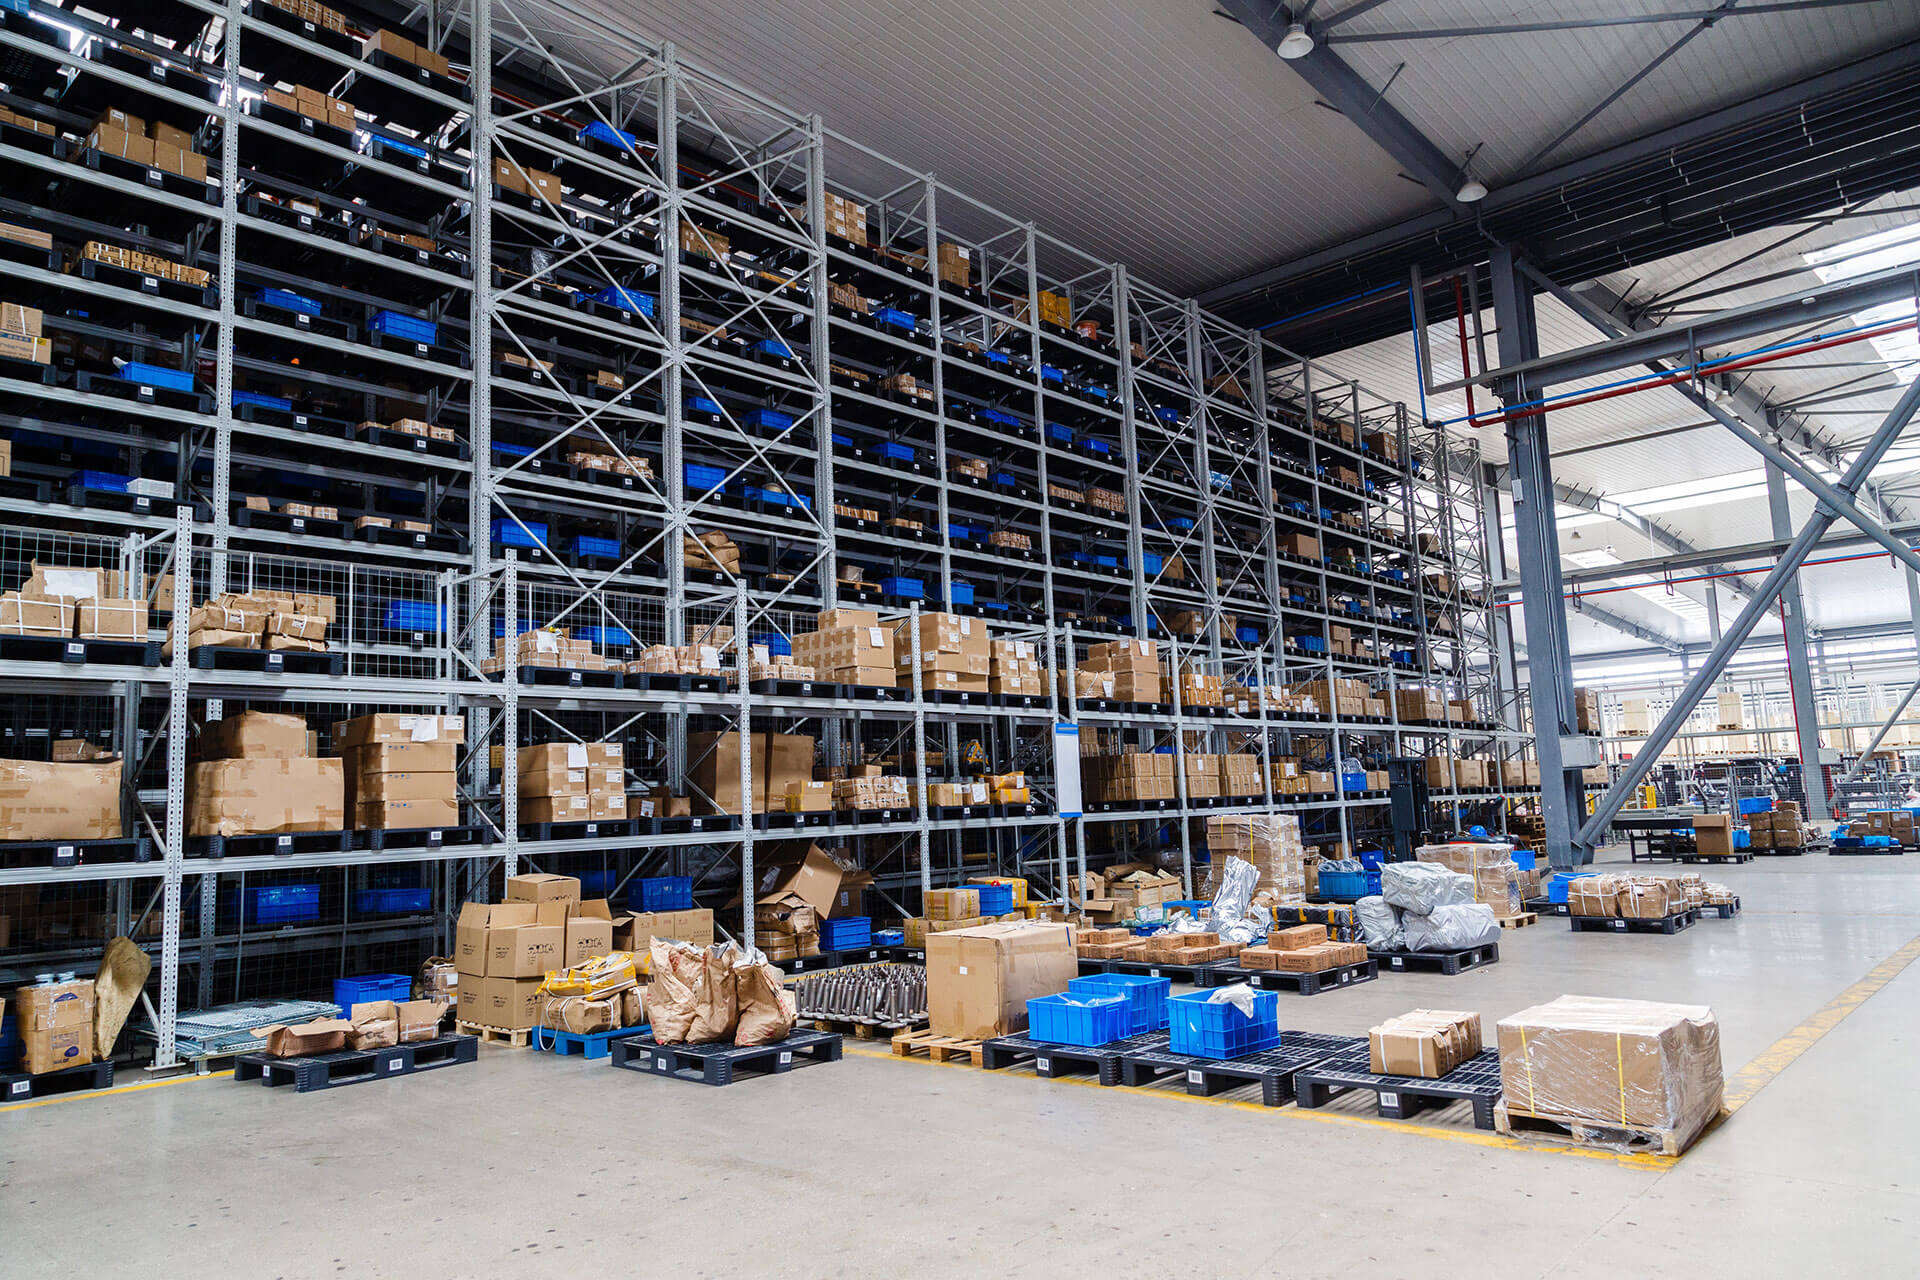 Industry,Manufacturing,improve productivity,Optimise the logistics flow